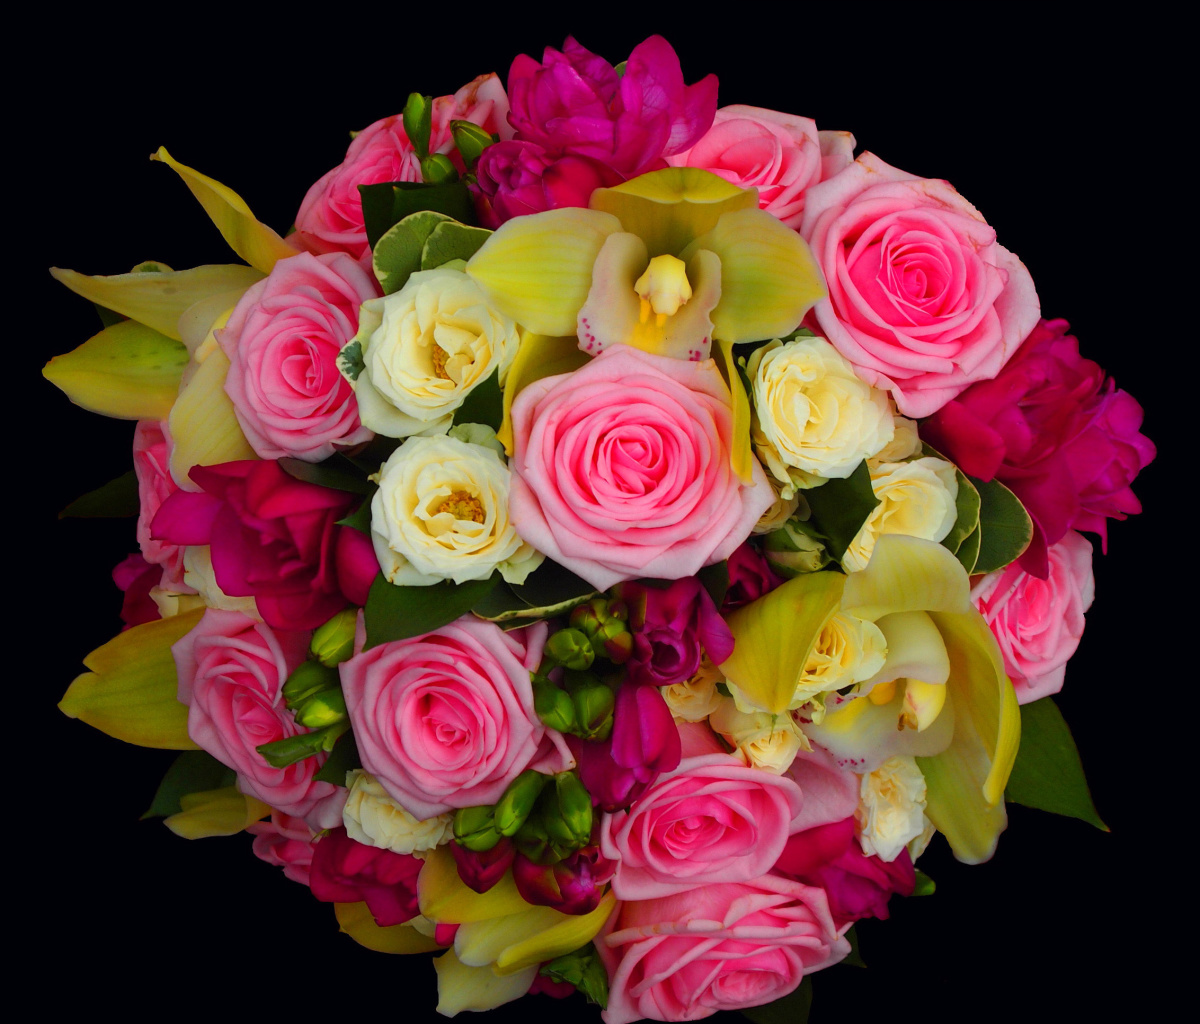 Das Bouquet of roses and yellow orchid, floristry Wallpaper 1200x1024